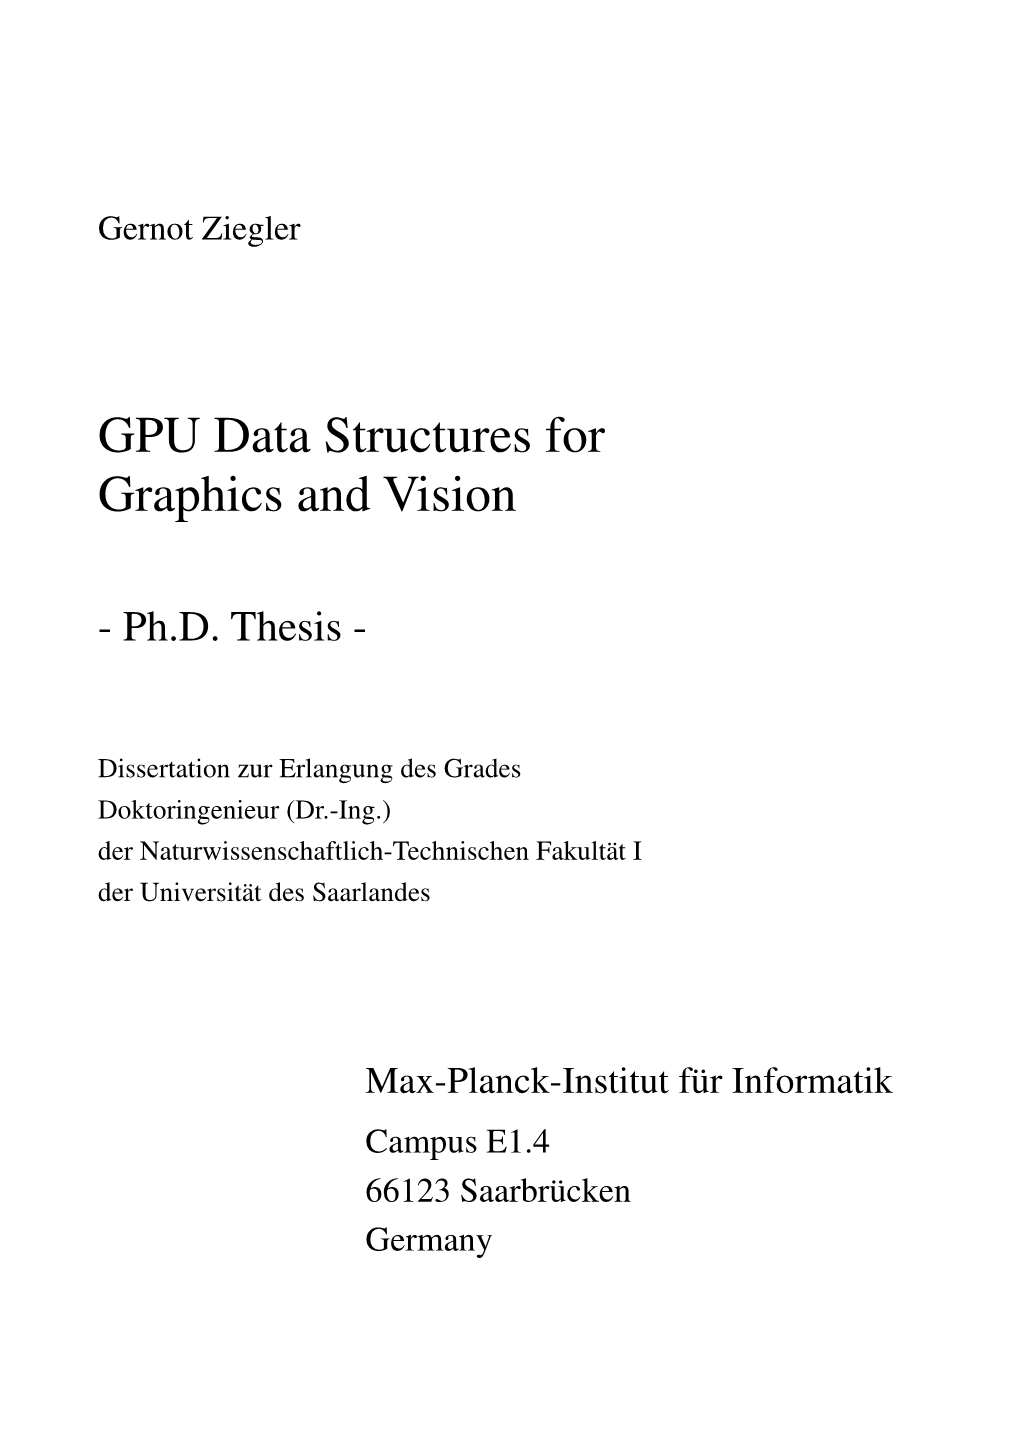 GPU Data Structures for Graphics and Vision